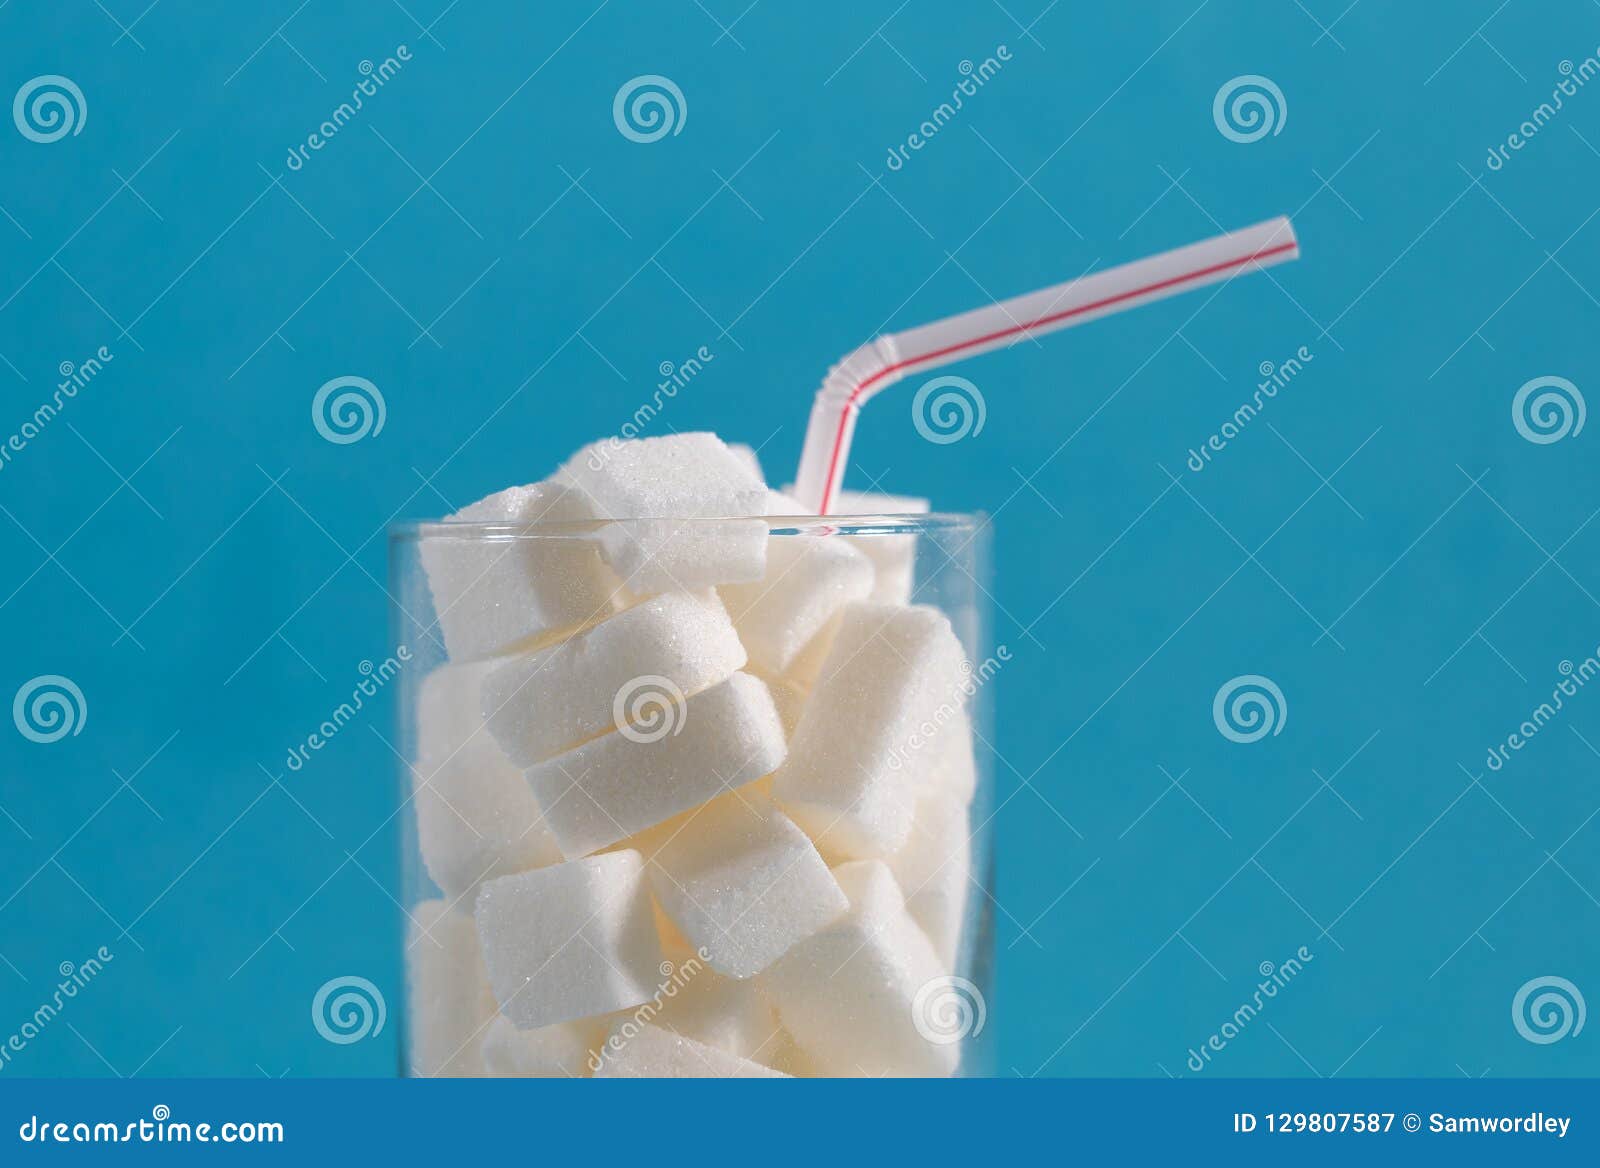 conceptual still life image of glass full of sugar cubes and straw in excess of calories in soft drinks